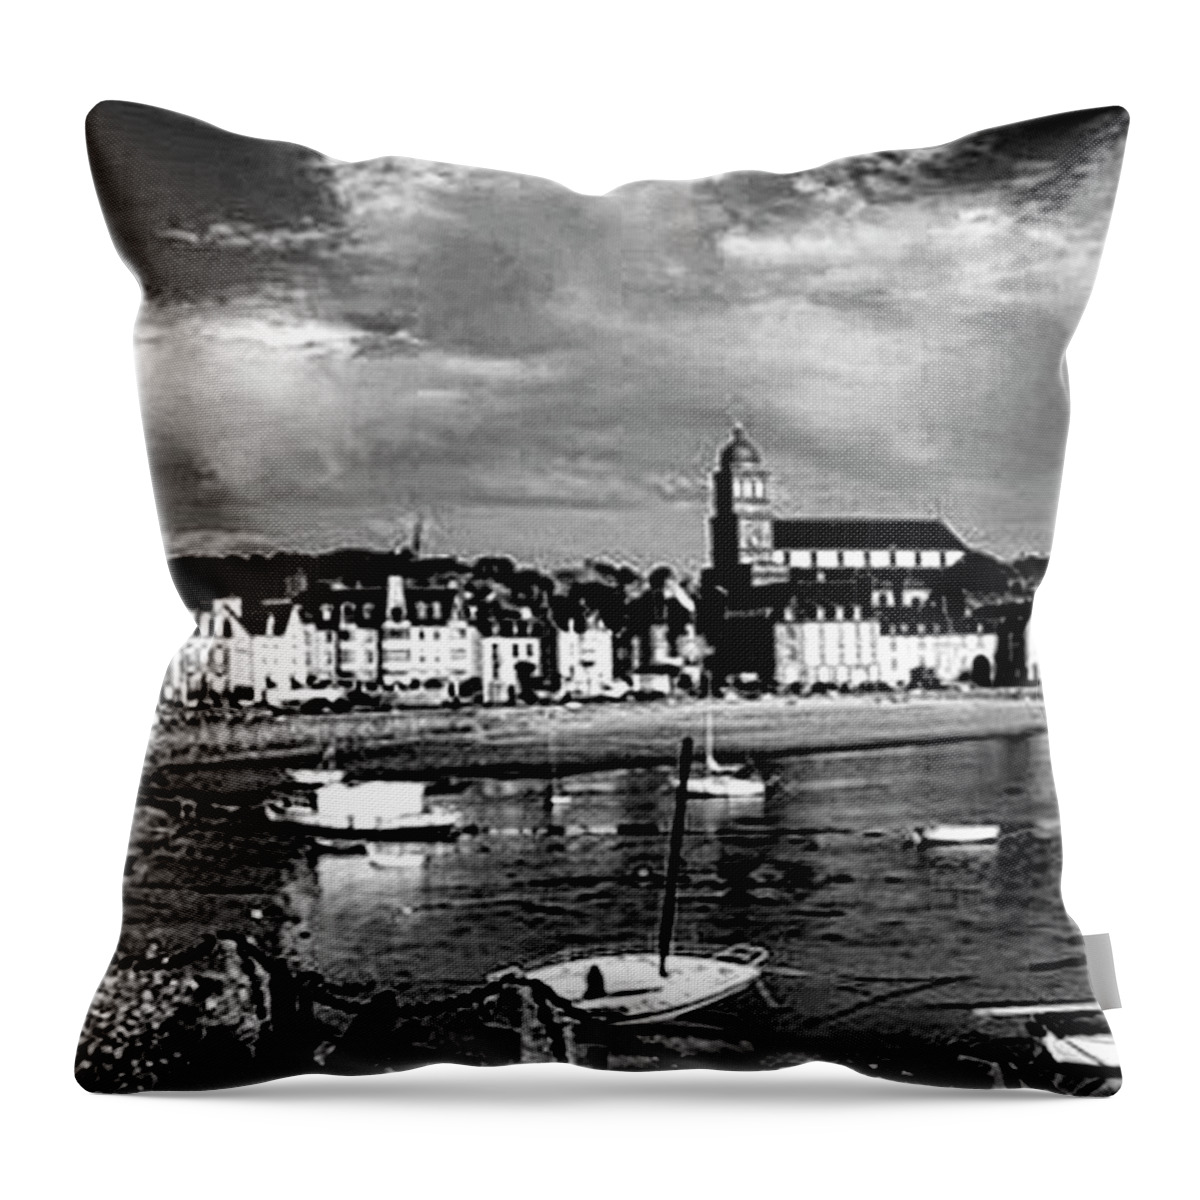 Saint Servan Anse Throw Pillow featuring the photograph Boats In The Anse by Elf EVANS